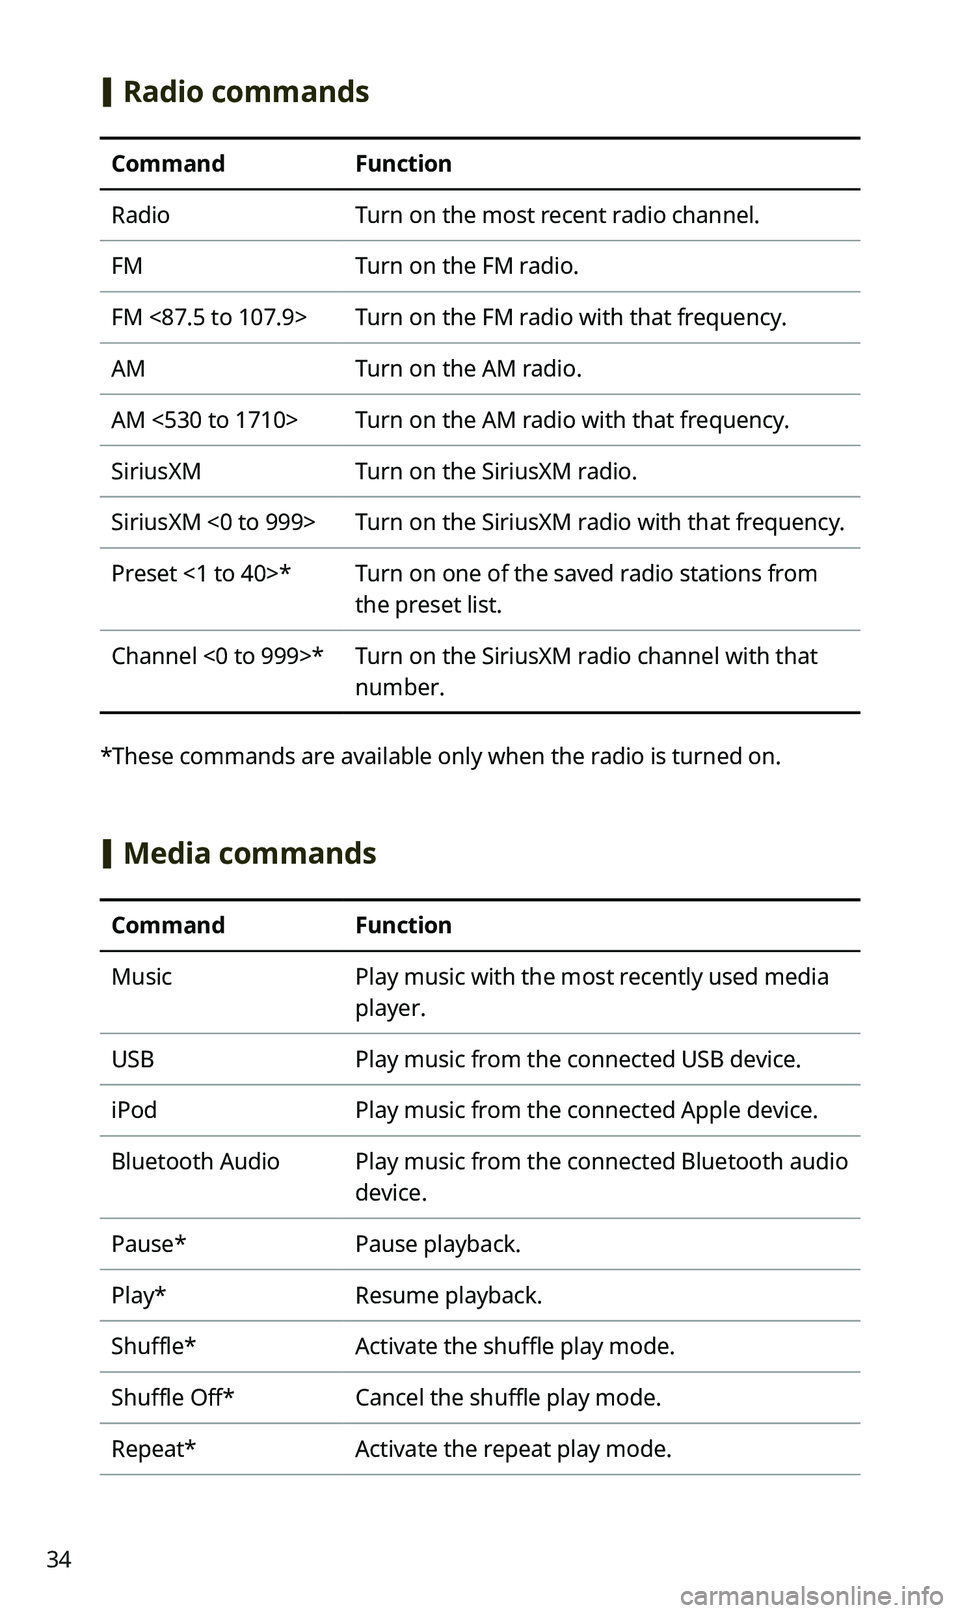 KIA SPORTAGE 2020  Quick Reference Guide 34
 [Radio commands
CommandFunction
RadioTurn on the most recent radio channel.
FMTurn on the FM radio.
FM <87.5 to 107.9>Turn on the FM radio with that frequency.
AMTurn on the AM radio.
AM <530 to 1